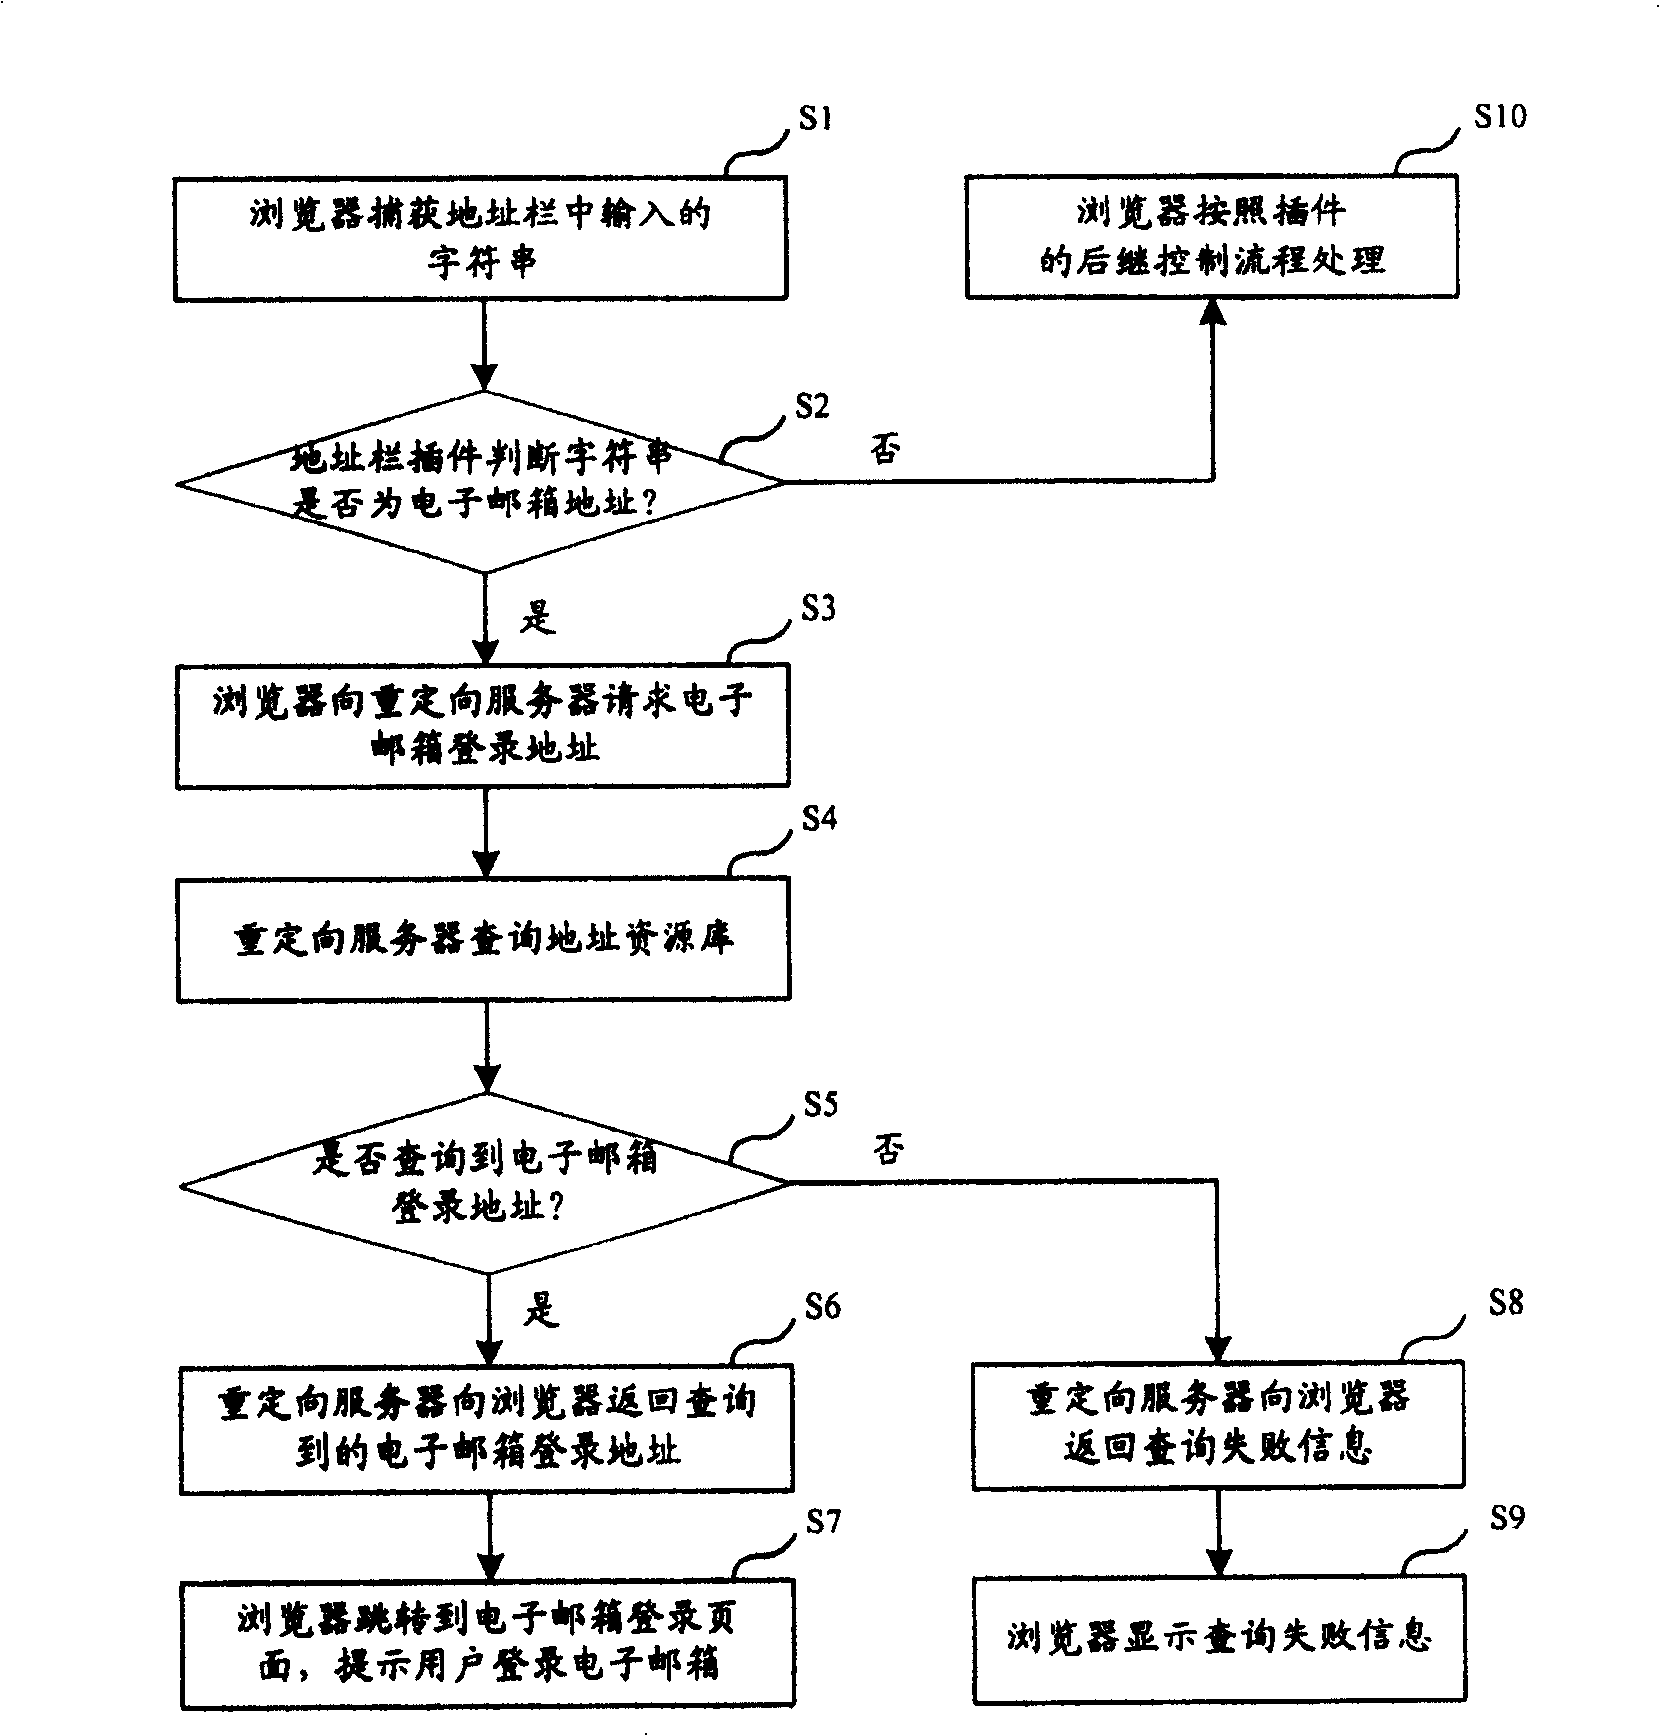 Electronic mail box login method and system thereof